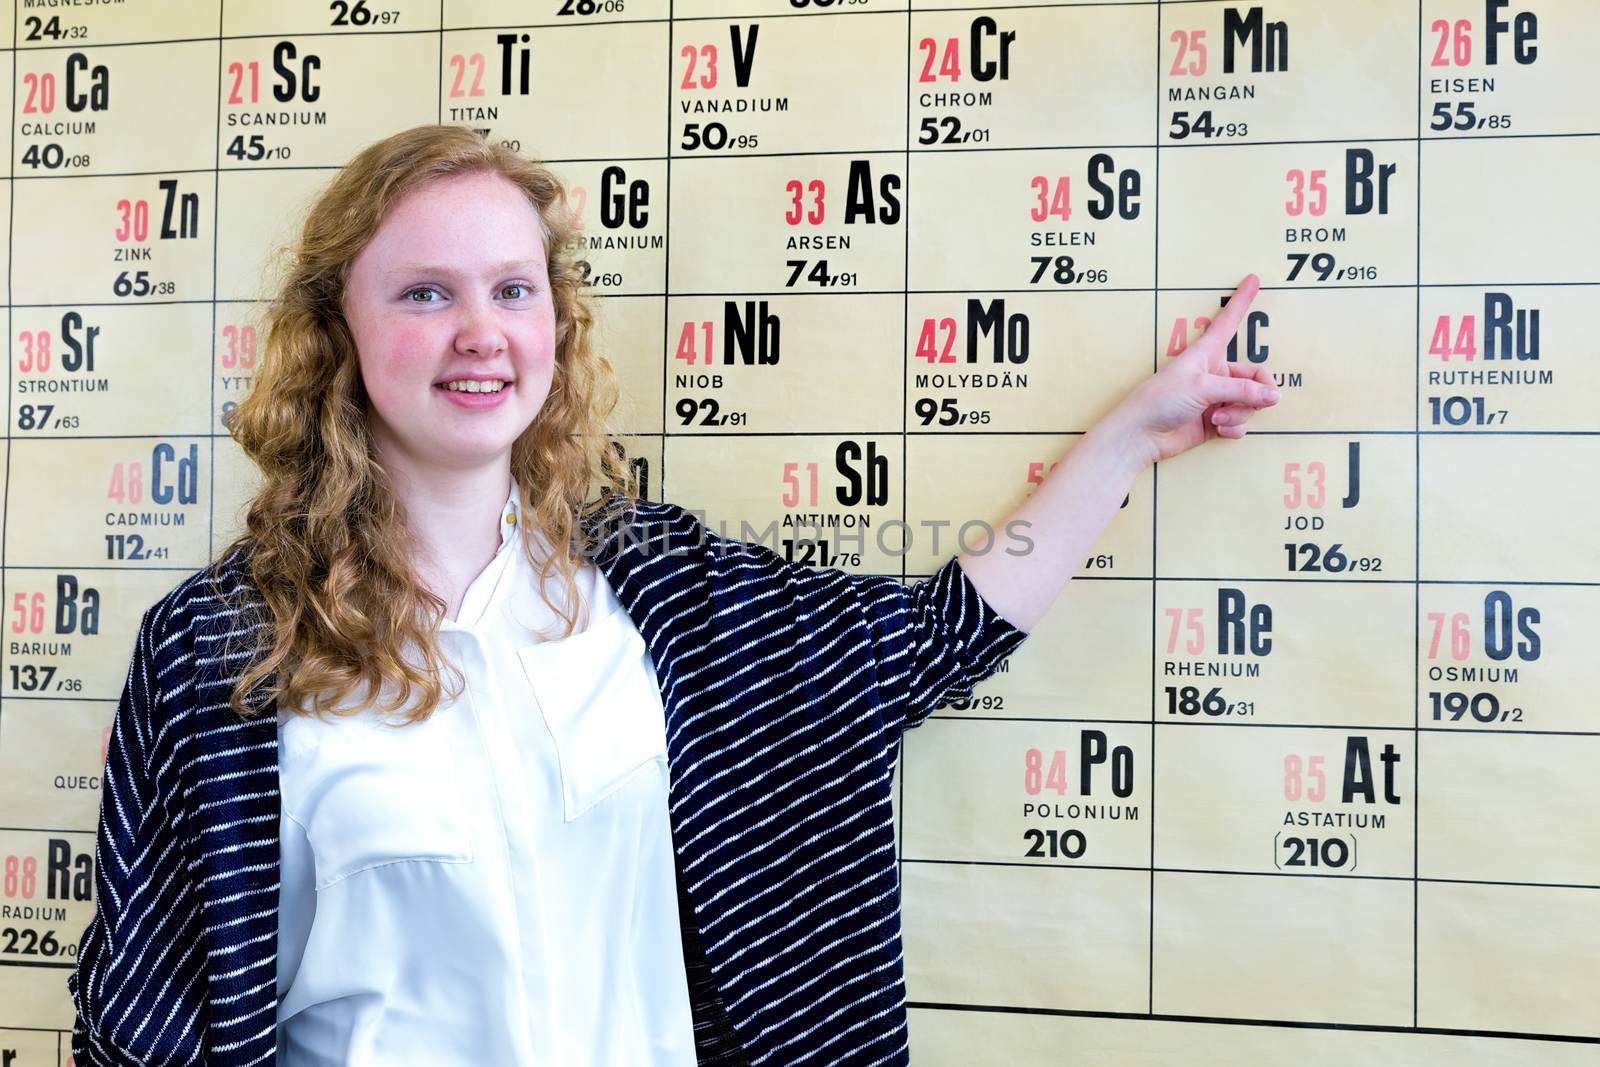 Dutch teenage girl pointing finger at periodic table by BenSchonewille